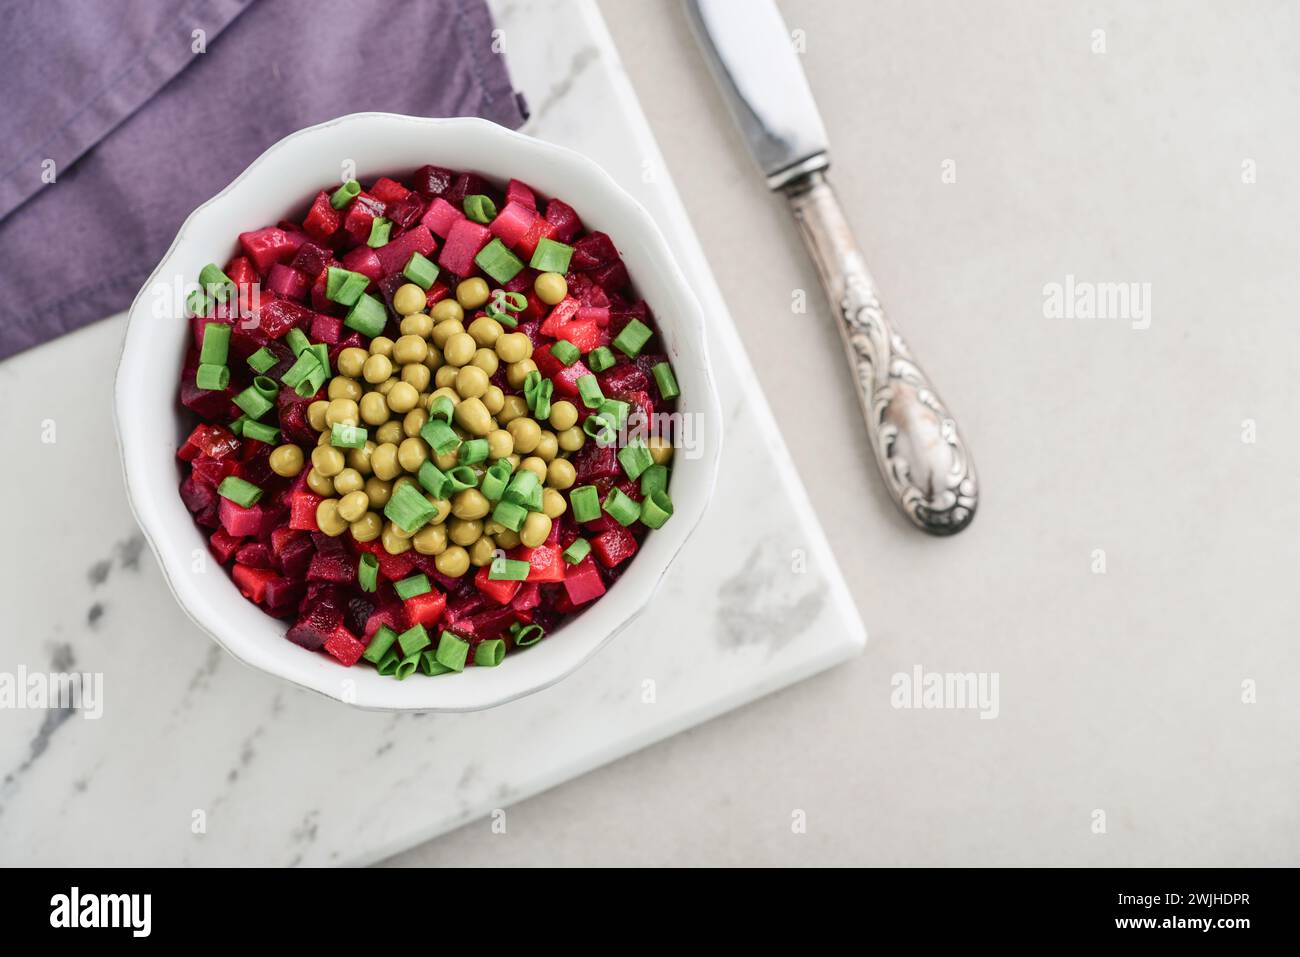 Vinegret - traditional Russian vegetable salad in bowl on light background, top view Stock Photo